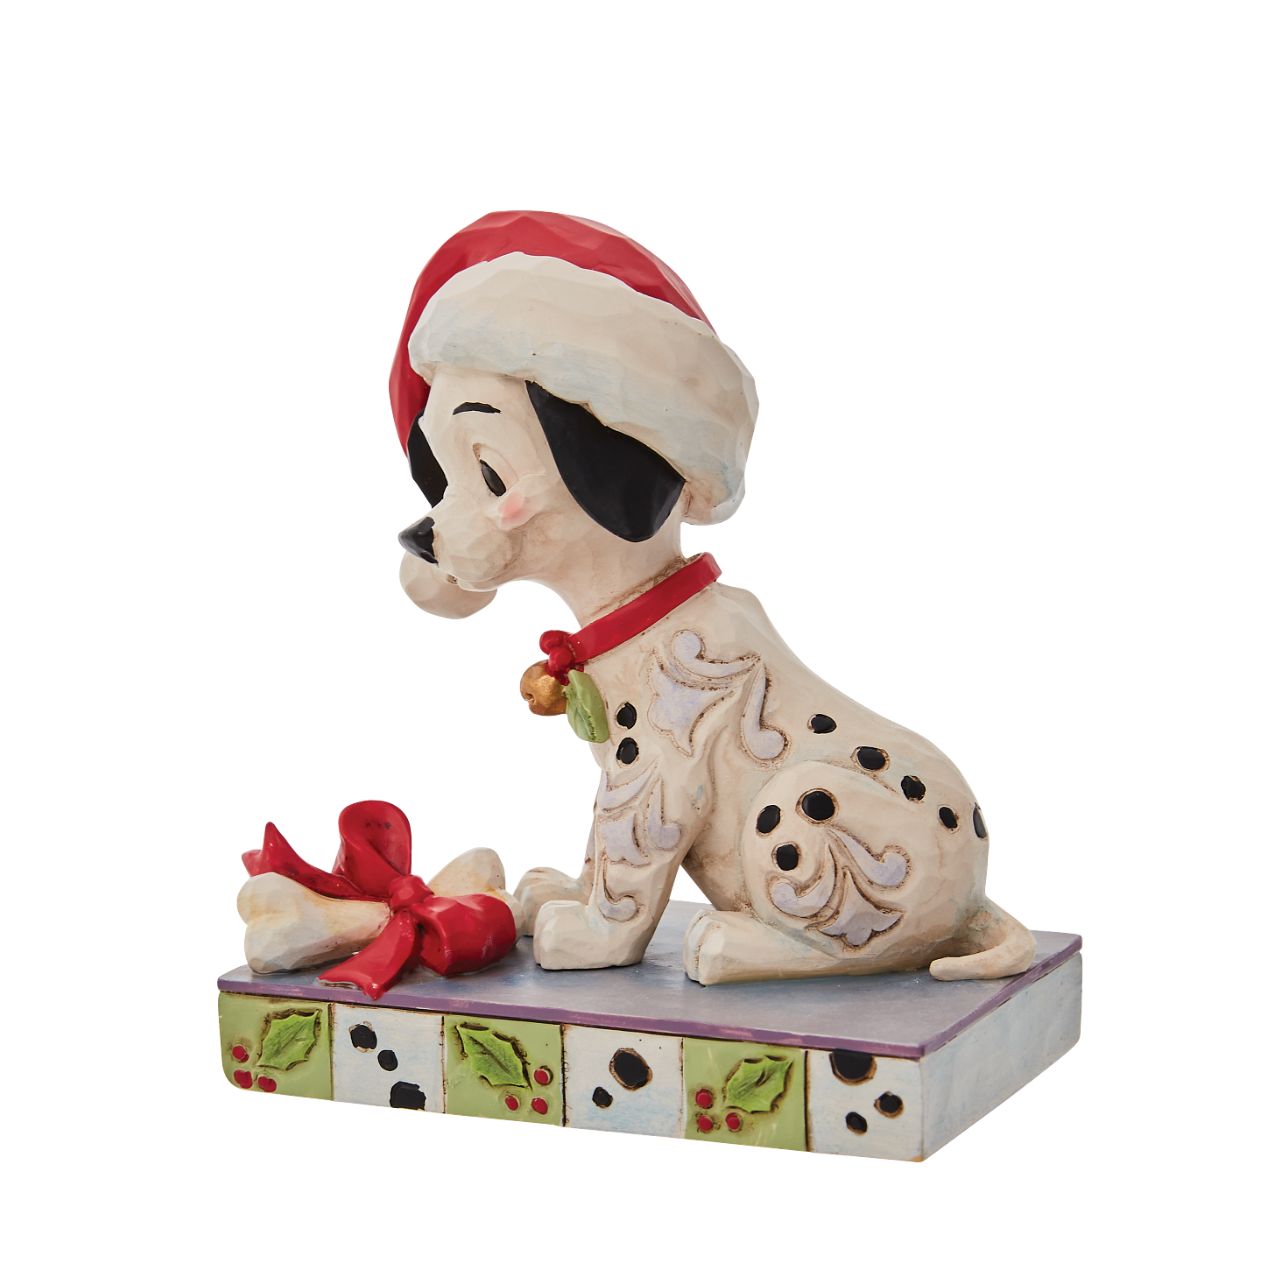 Jim Shore Christmas Lucky Personality Pose Figurine  With one hundred and one brothers and sisters, Christmastime is a delight for Lucky. Enjoying the winter in London, Lucky savours a bone while he wears holly and a Santa hat decked out in Jim Shore's intricate detail.